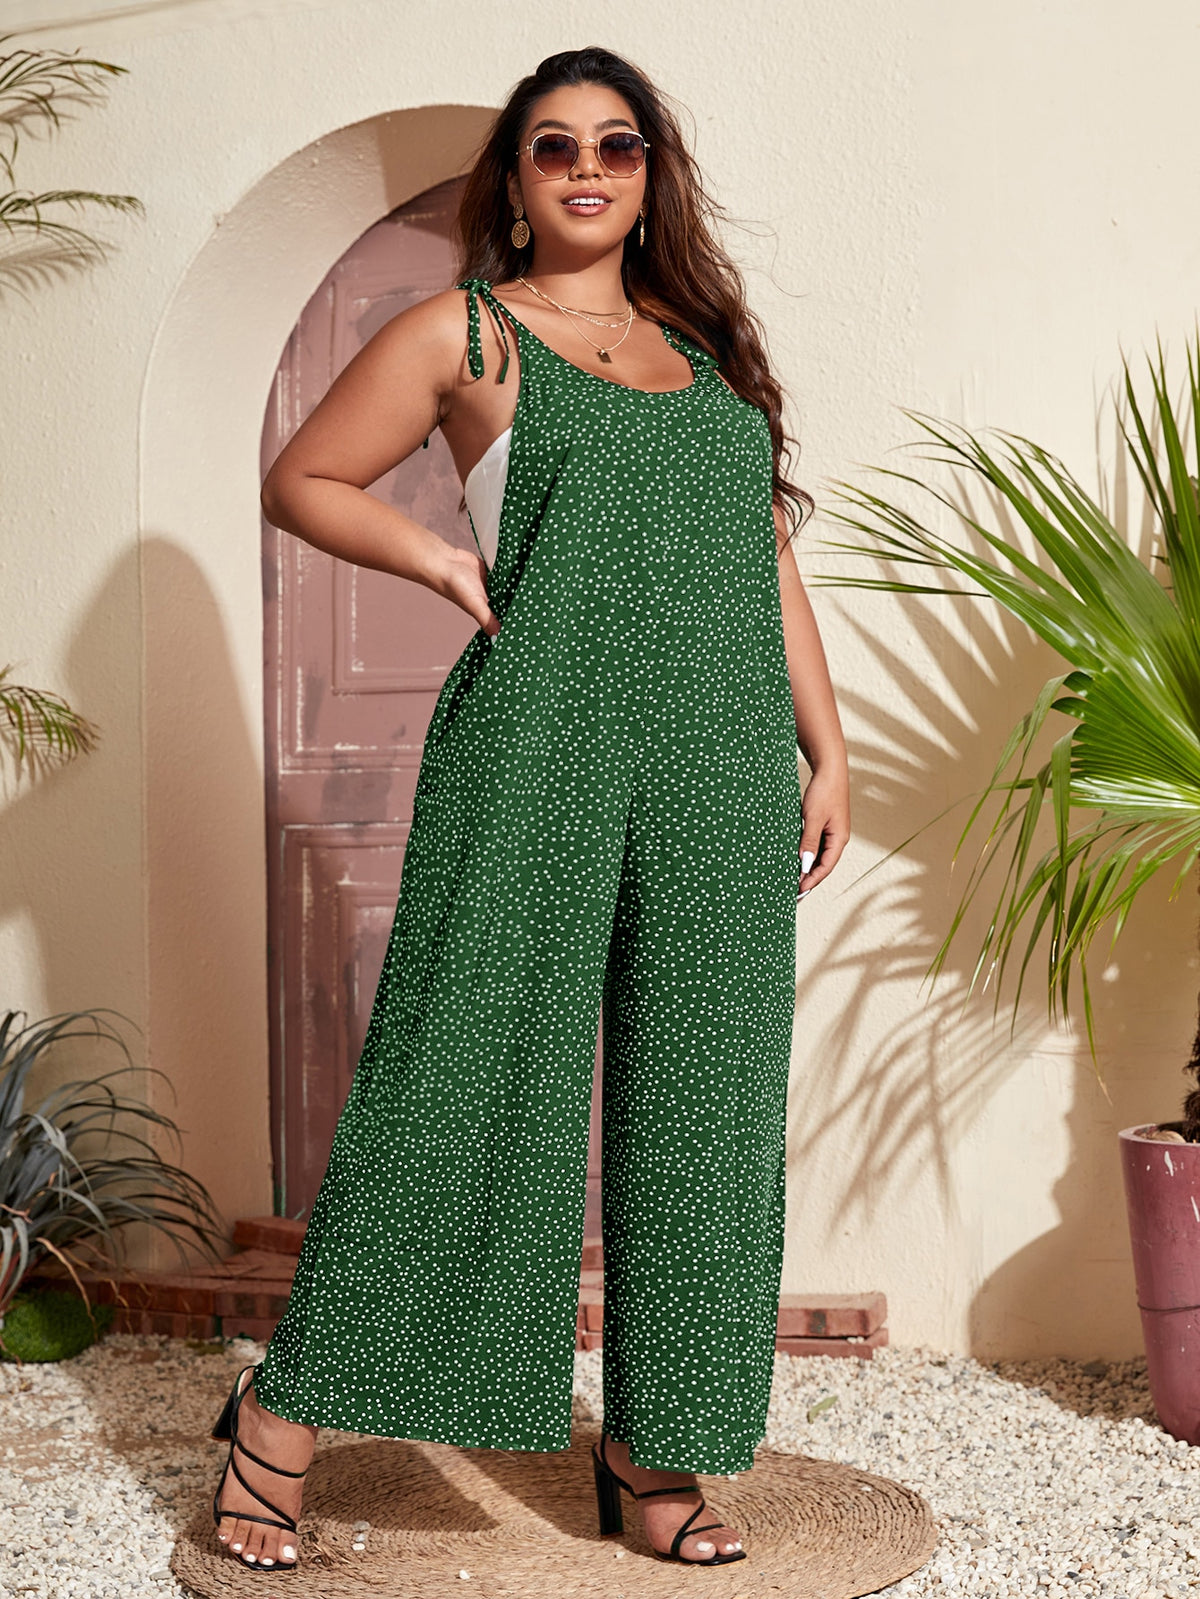 Plus Polka Dot Cami Jumpsuit with Knotted Shoulder - Green / 4XL